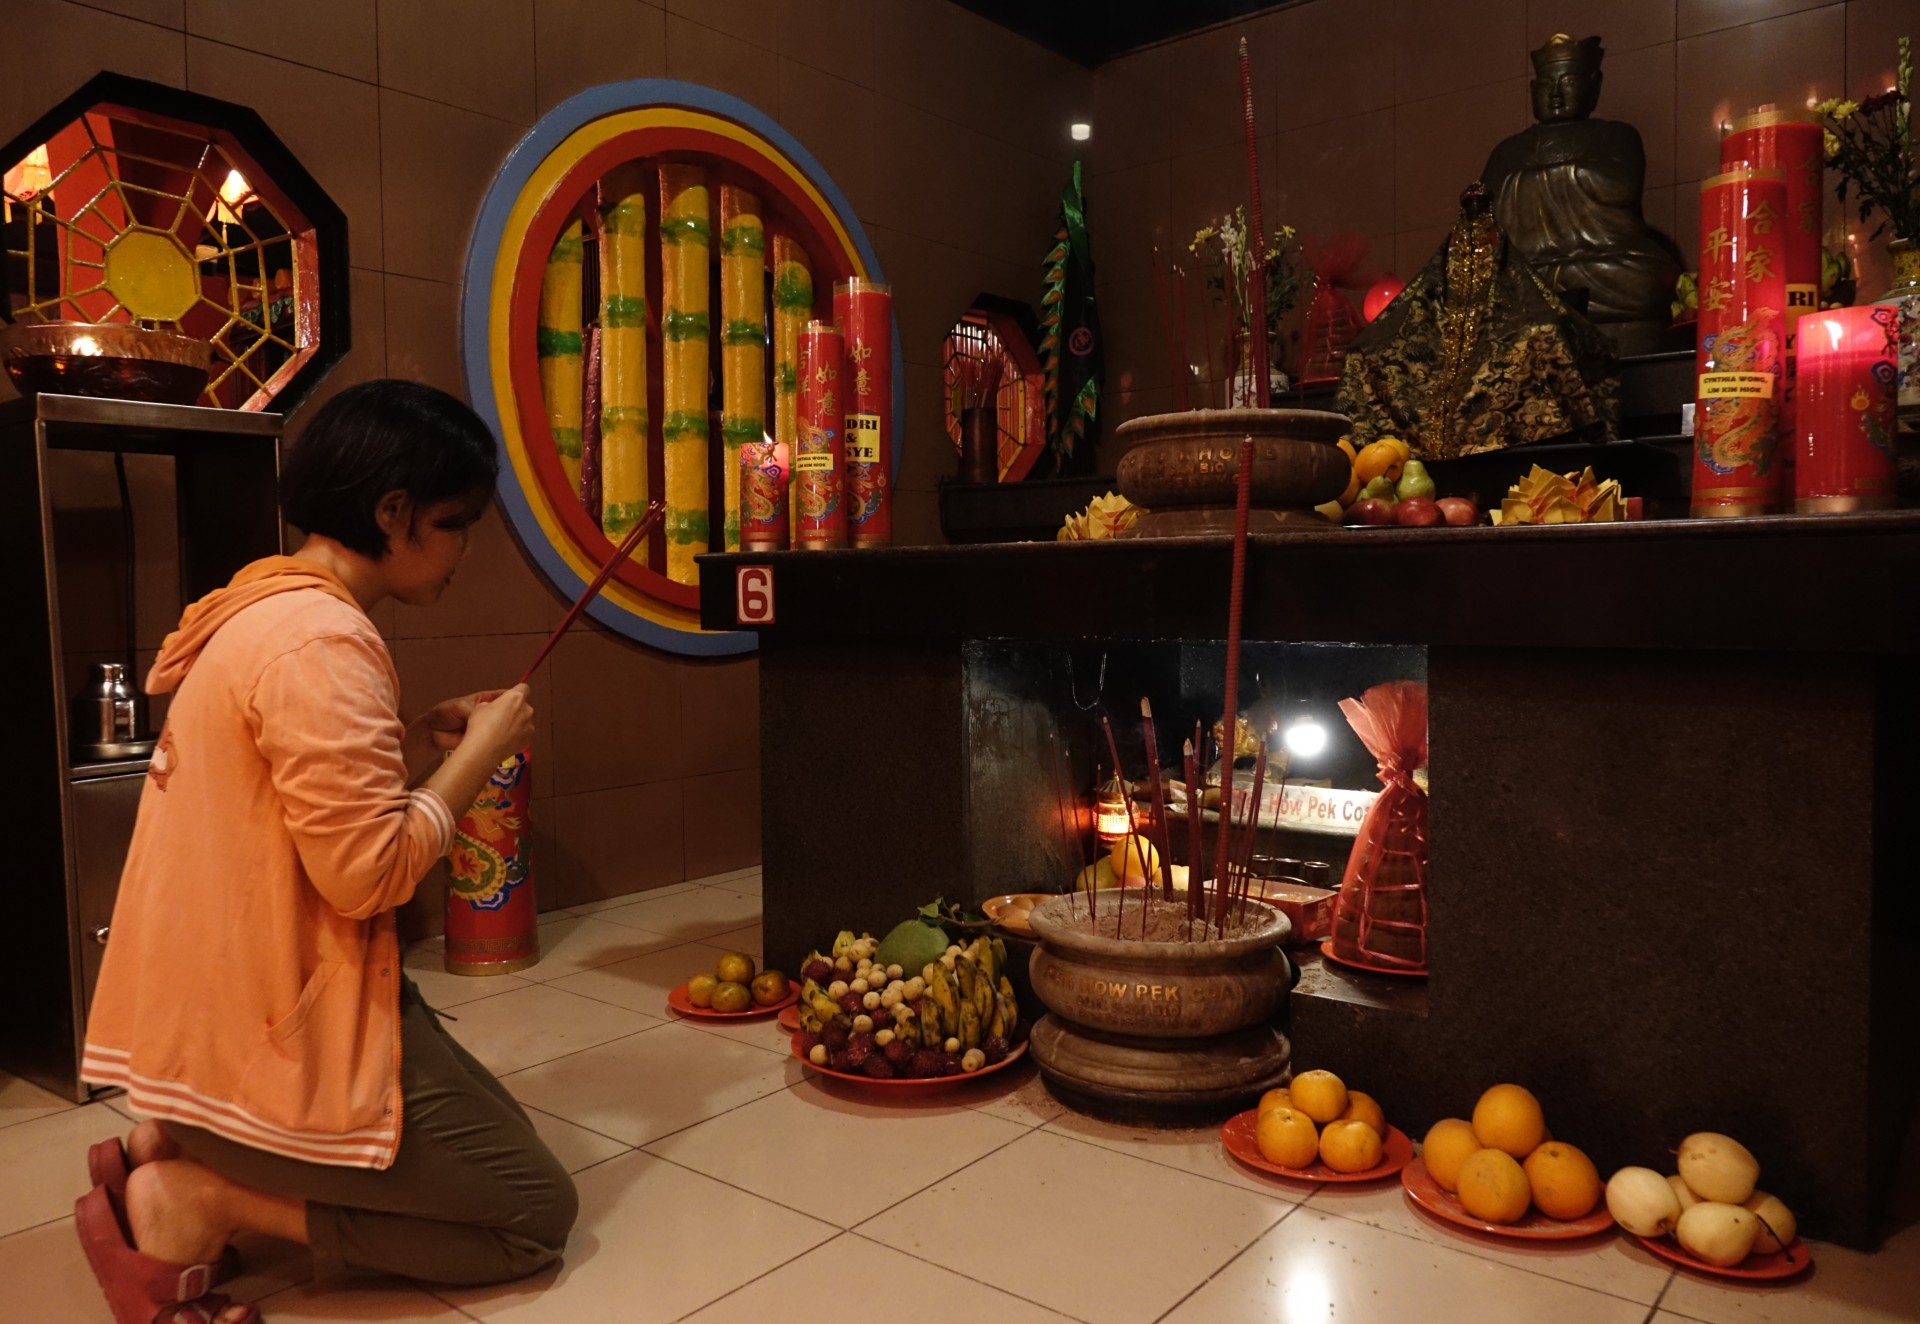 Woman kneeling at an altar covered with fruits and red candles